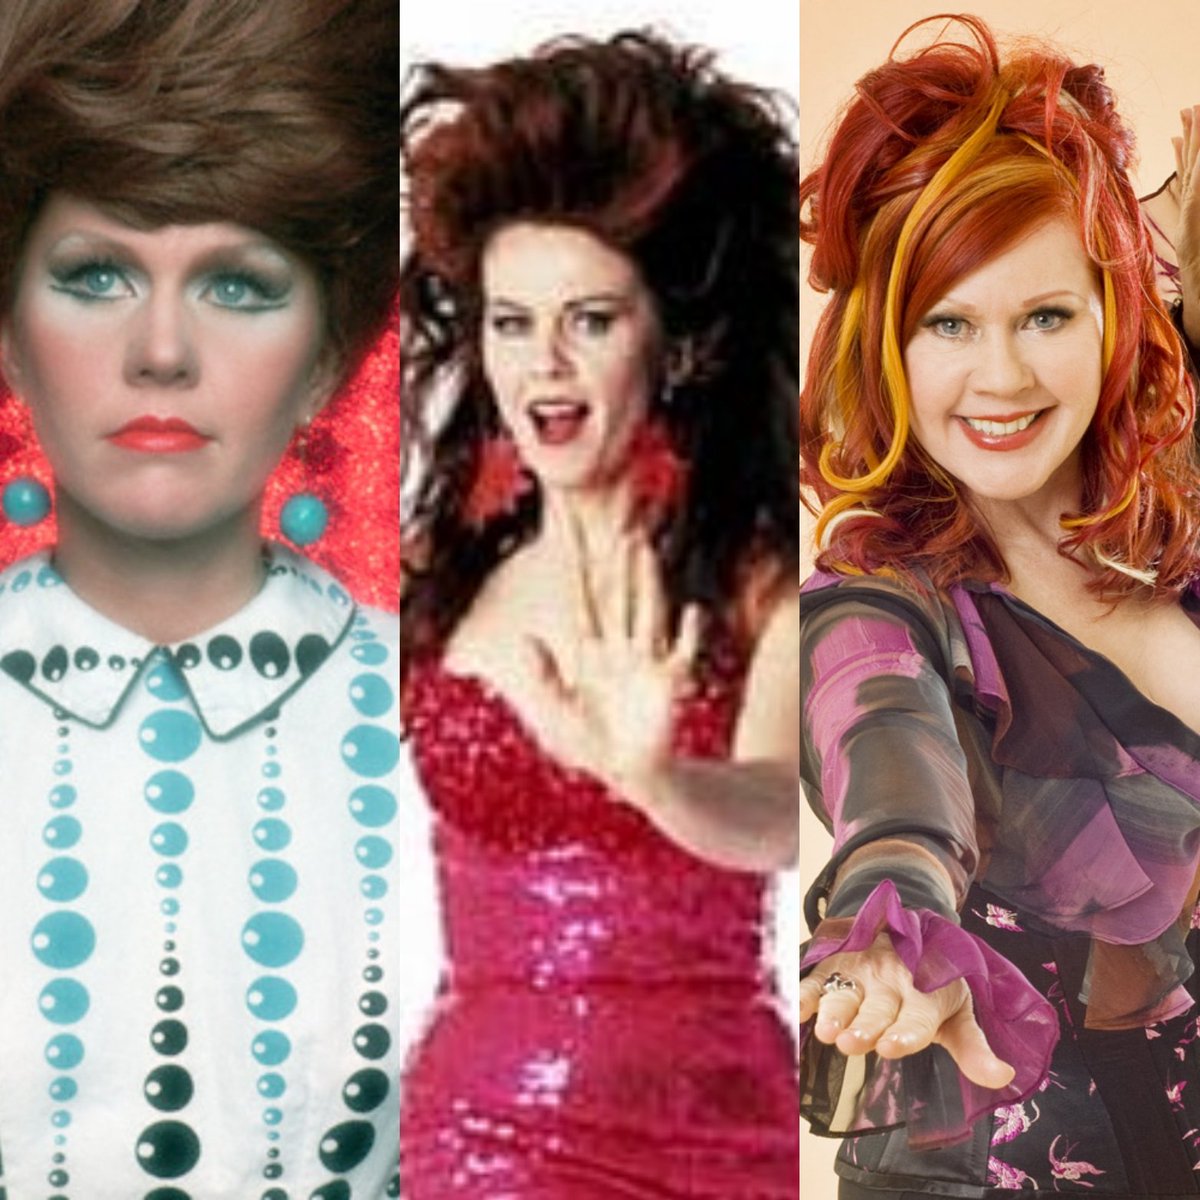 Happy birthday
#KatePierson
What are your favourite 
#B52s tracks & collaborations?